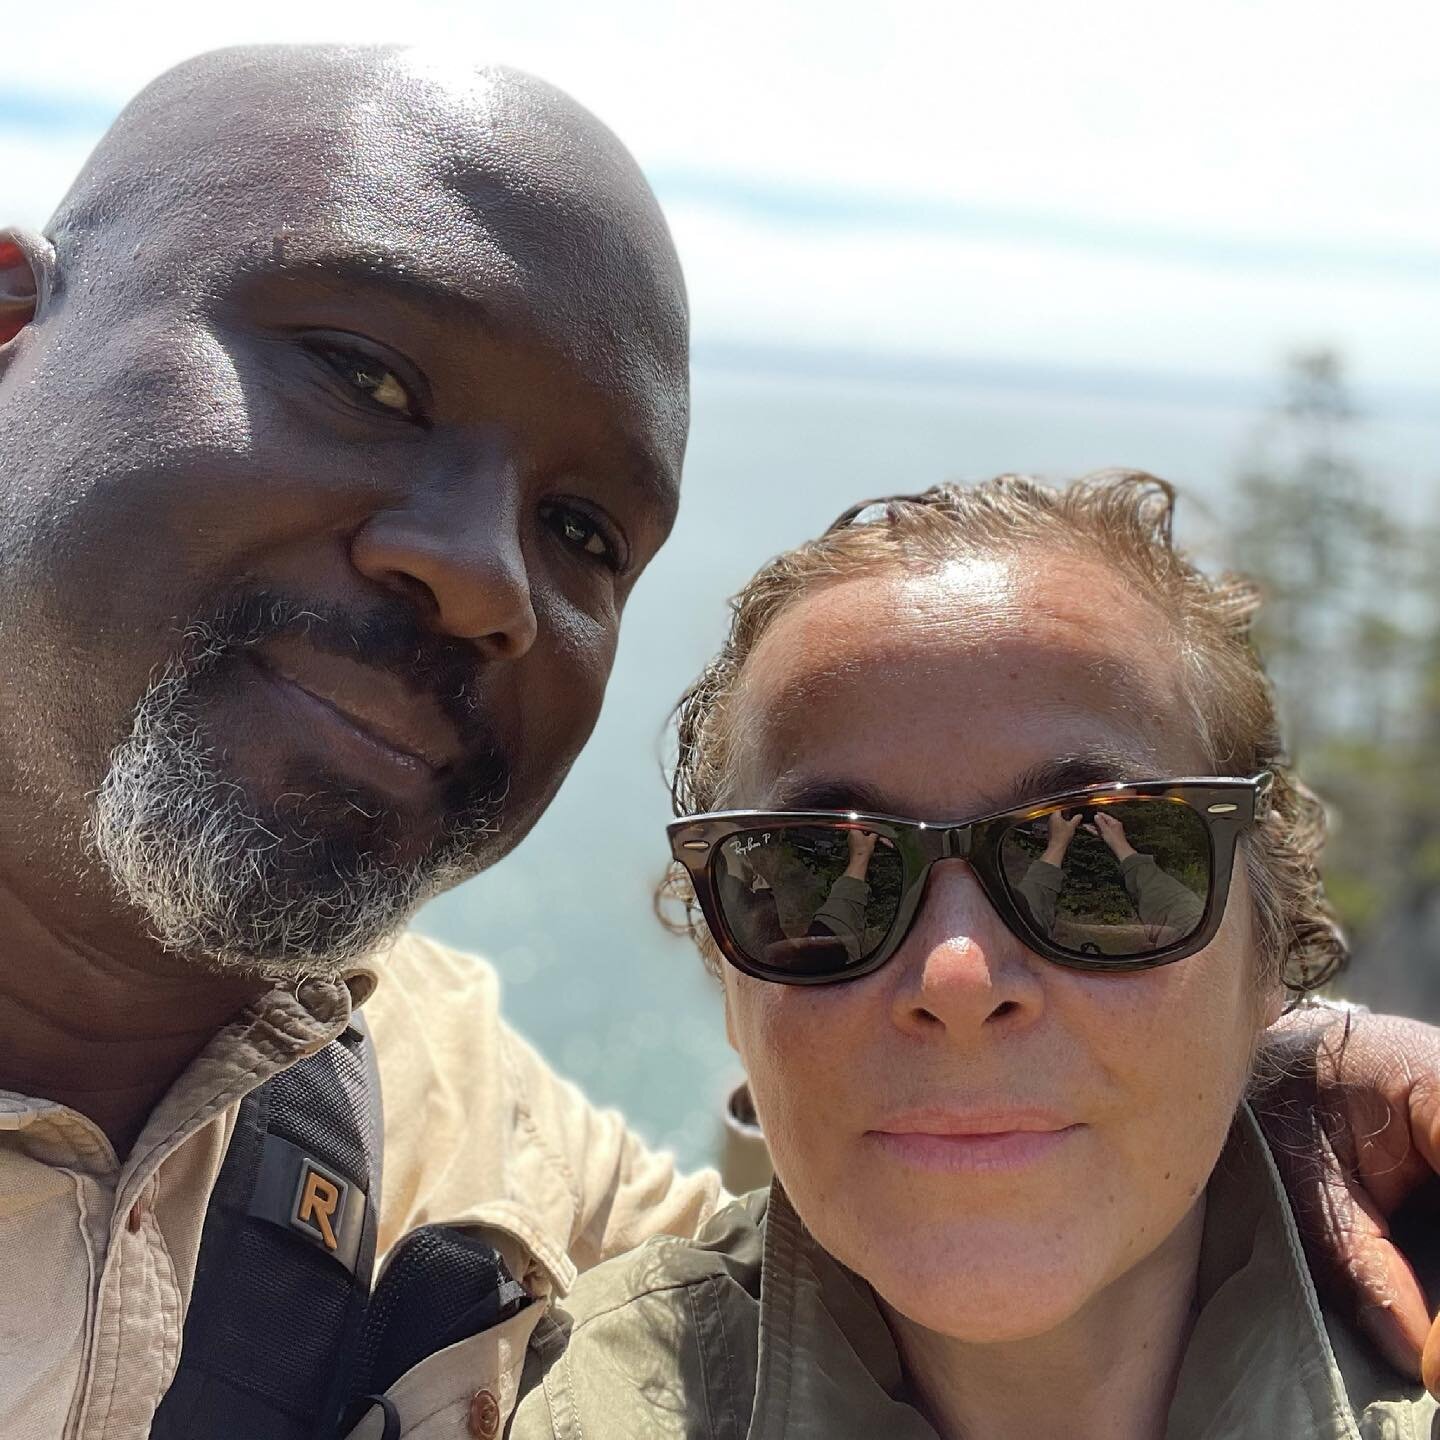 Three days in Lubec celebrating with my one and only for his birthday. Downeast Maine you are breathtakingly beautiful.  #downeastmaine #lubec #quoddyheadstatepark #breathe #healing #offthegrid @seanalonzoharris